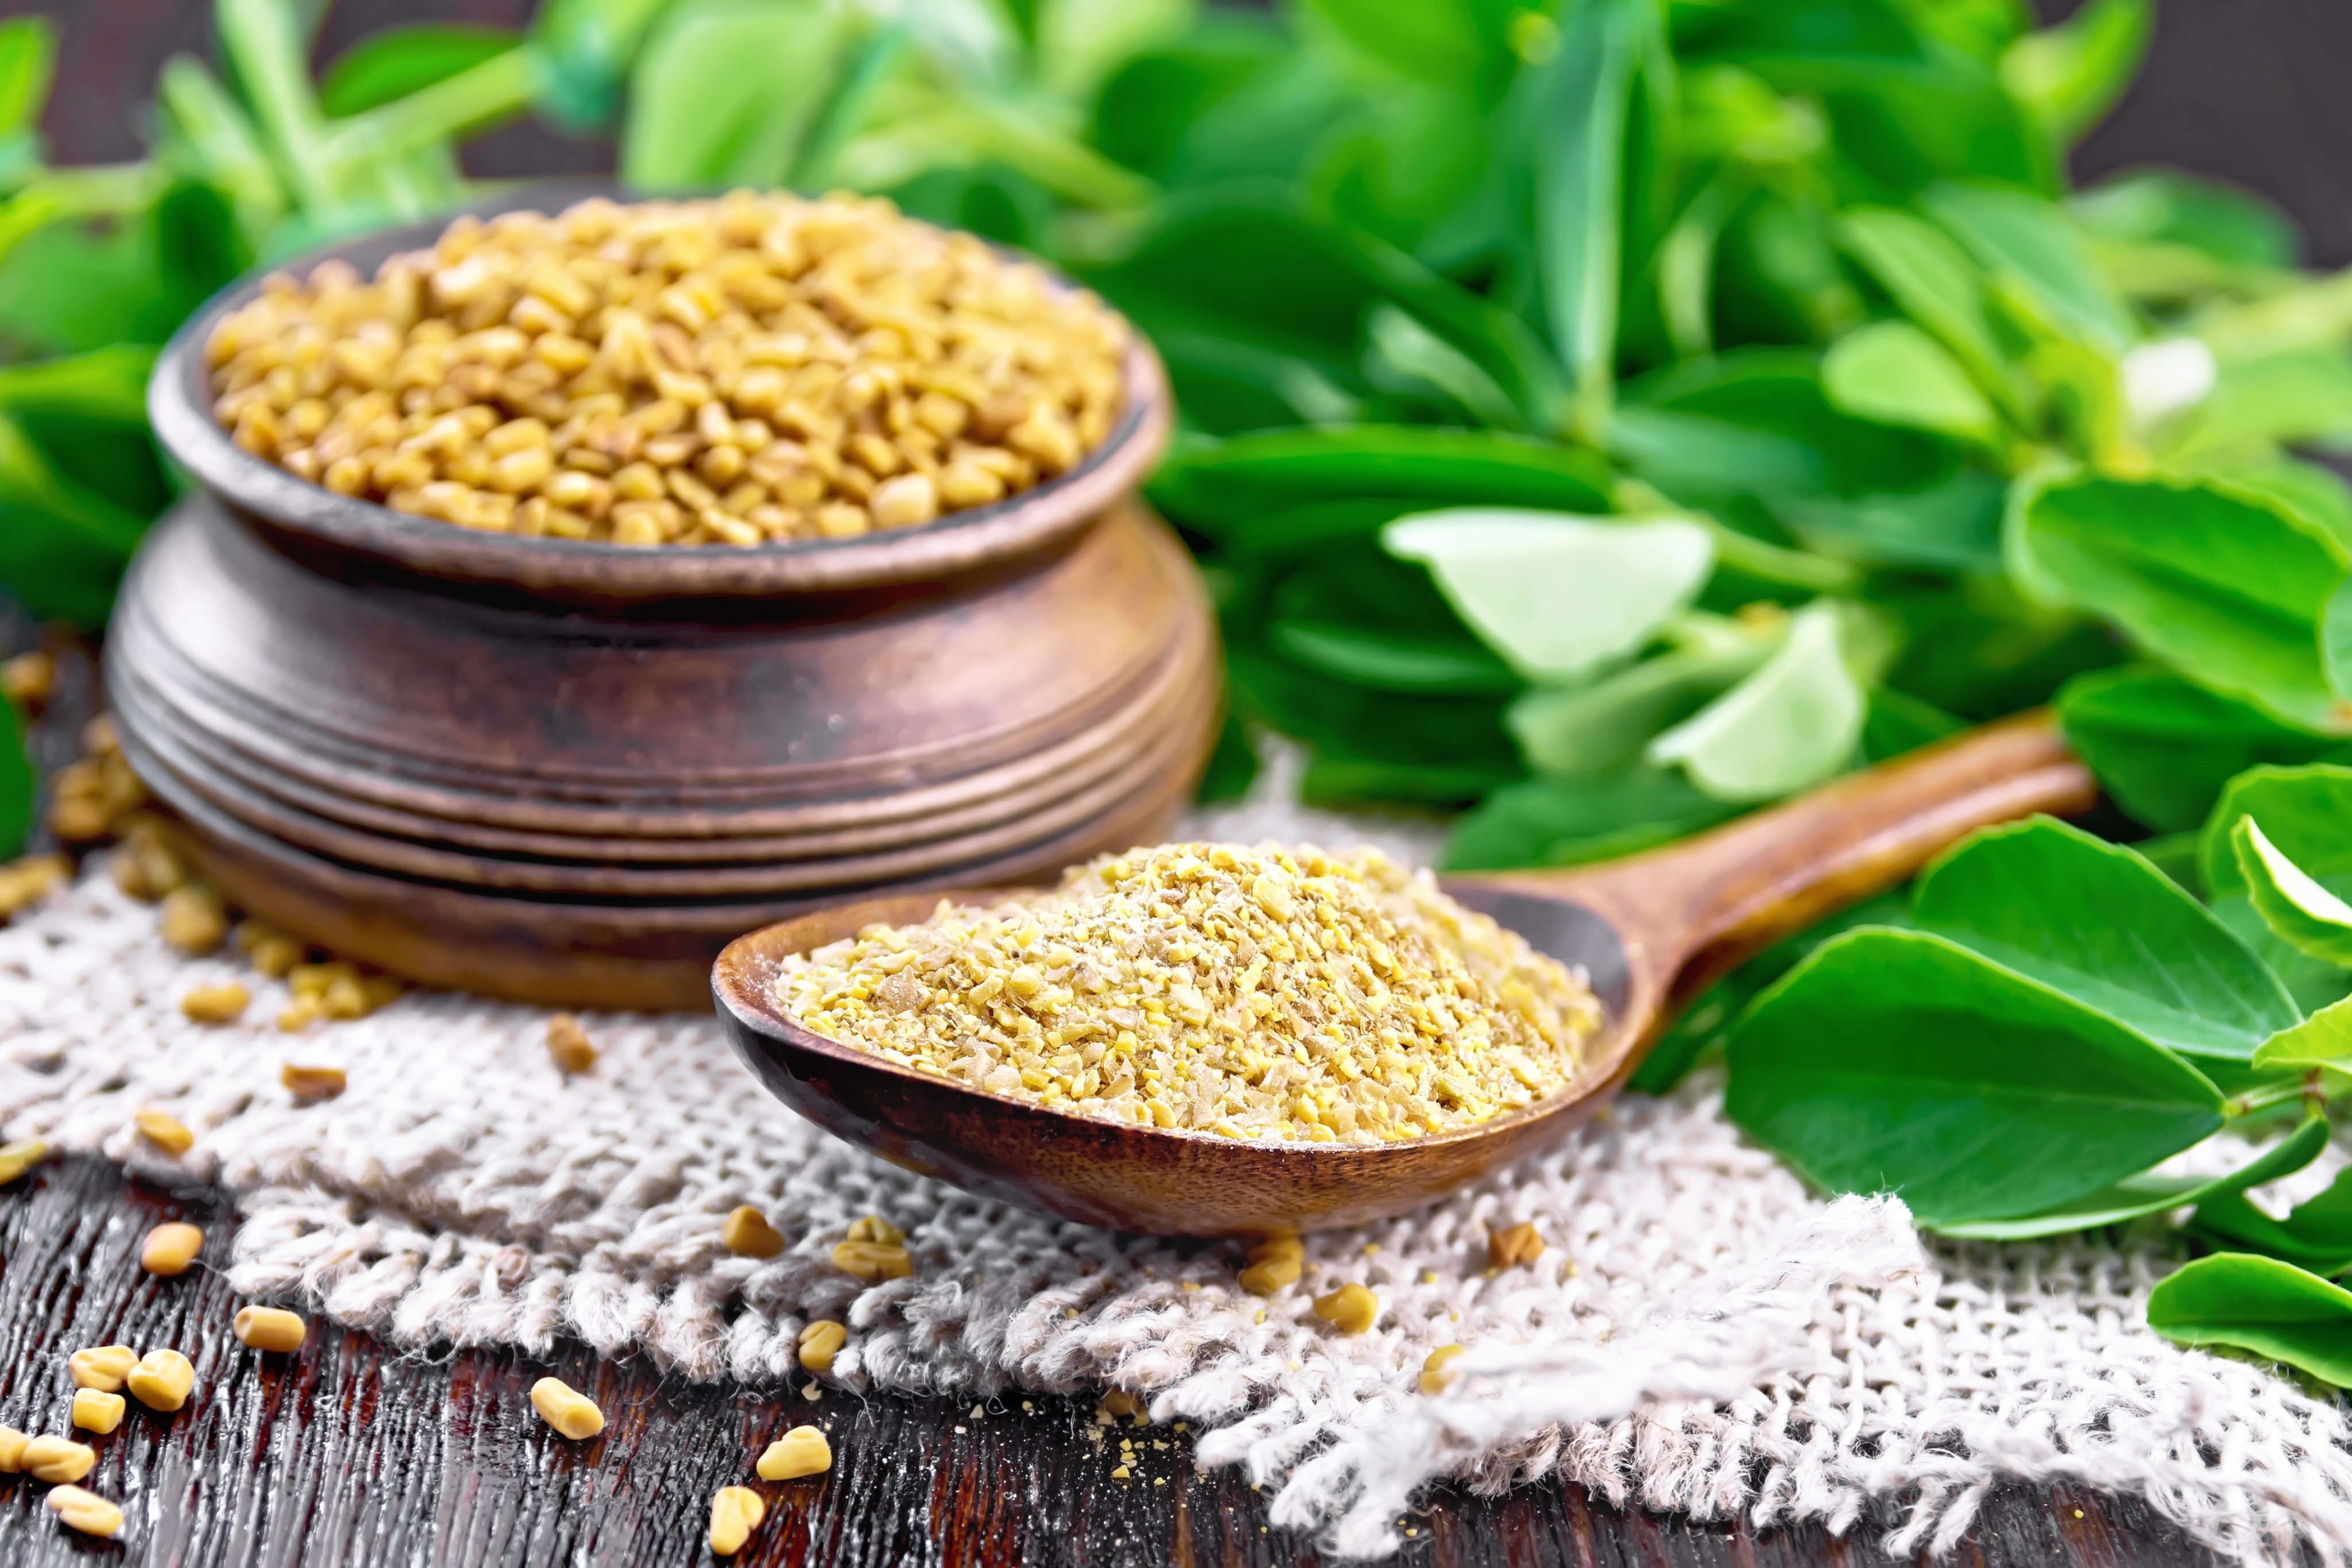 Whether taken in seed or powder form or consumed fresh as a herb, fenugreek’s many benefits according to traditional Chinese and Indian medicine include helping diabetics, aiding weight loss, and promoting heart health. Used powdered as a spice, It also makes food more tasty. Photo: Shutterstock